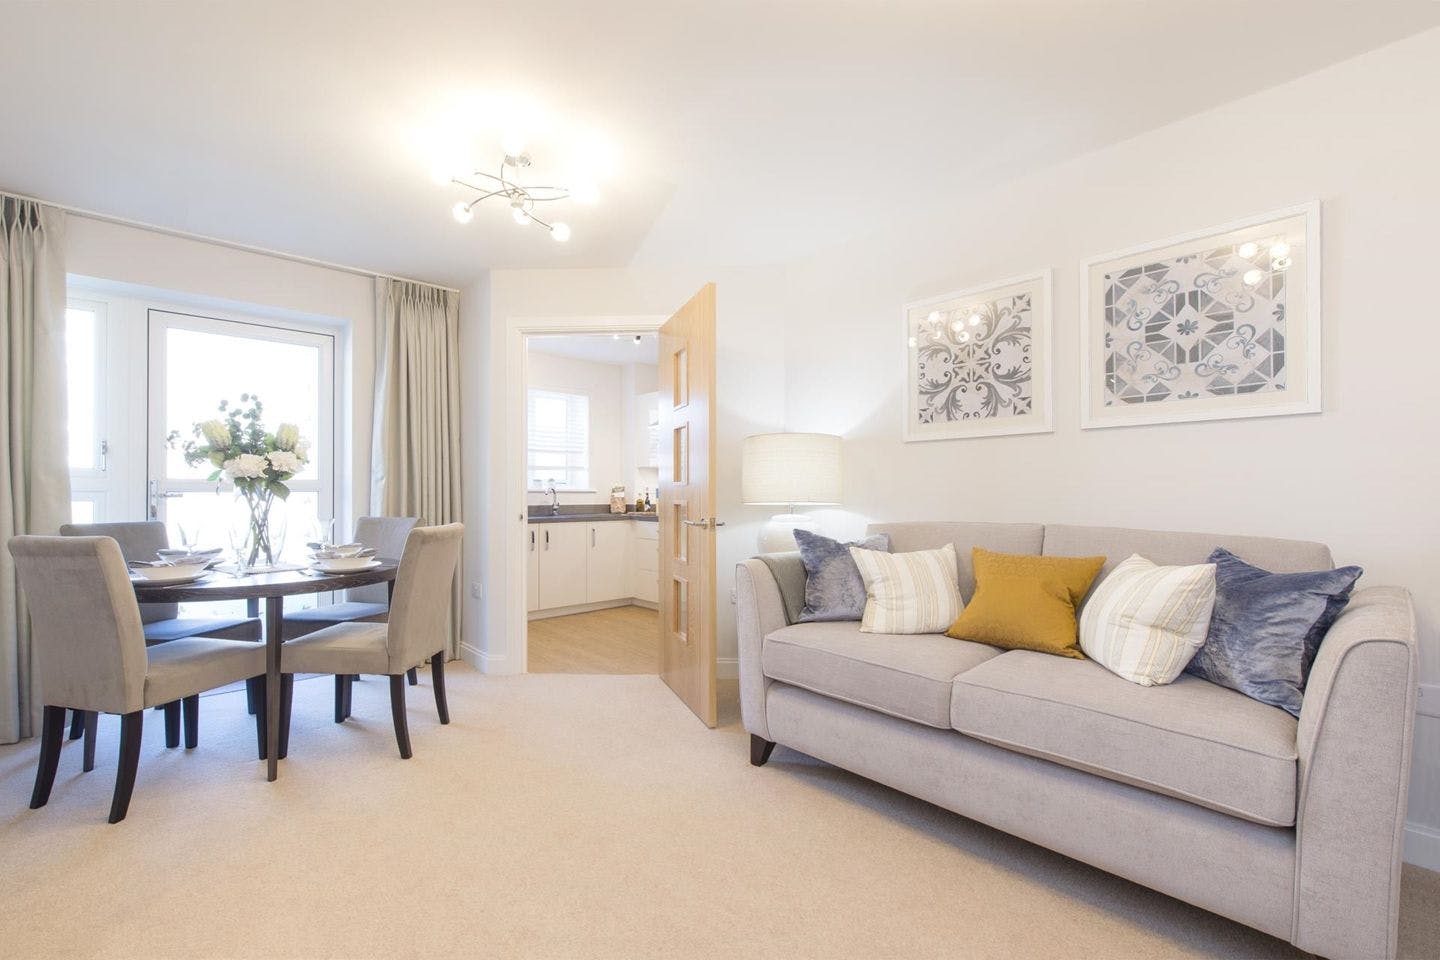 Living Room at Shilling Place Retirement Development in Hampshire